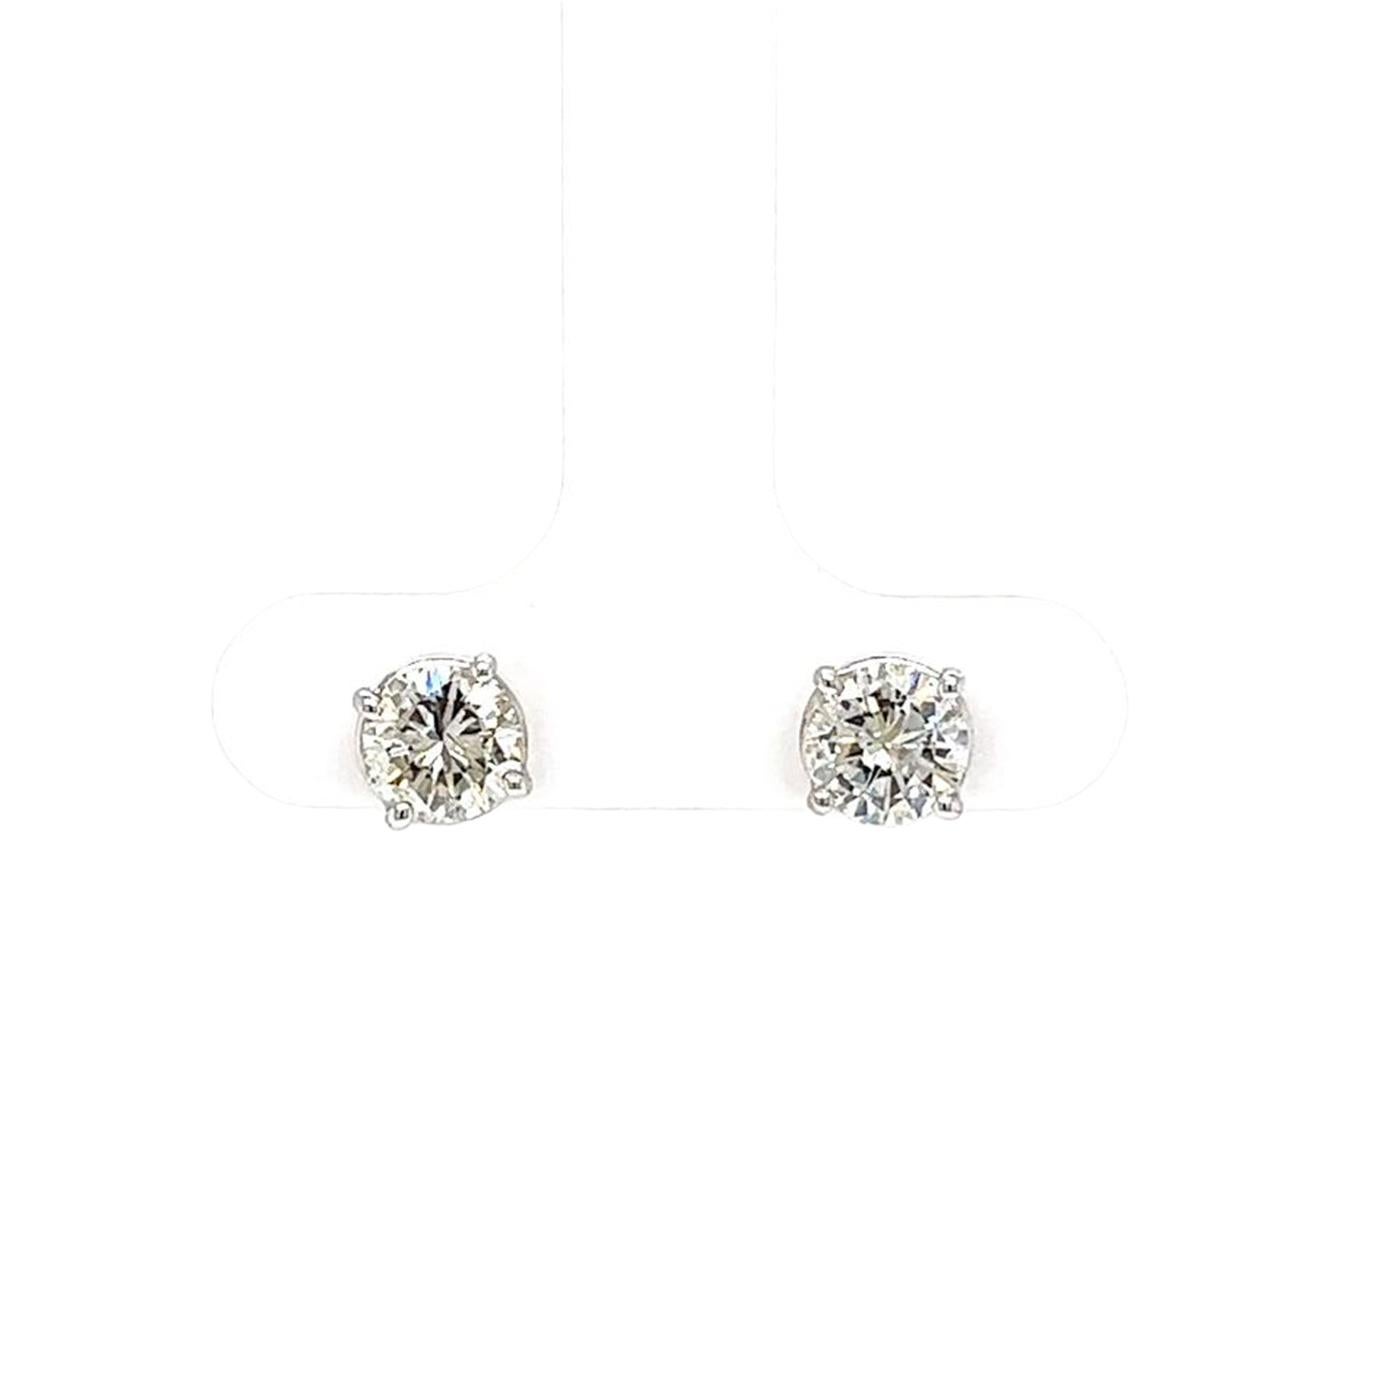 1.06t 4 Prong Basket Setting Natural Round Diamond Earrings in 14K White Gold In Good Condition For Sale In Aventura, FL